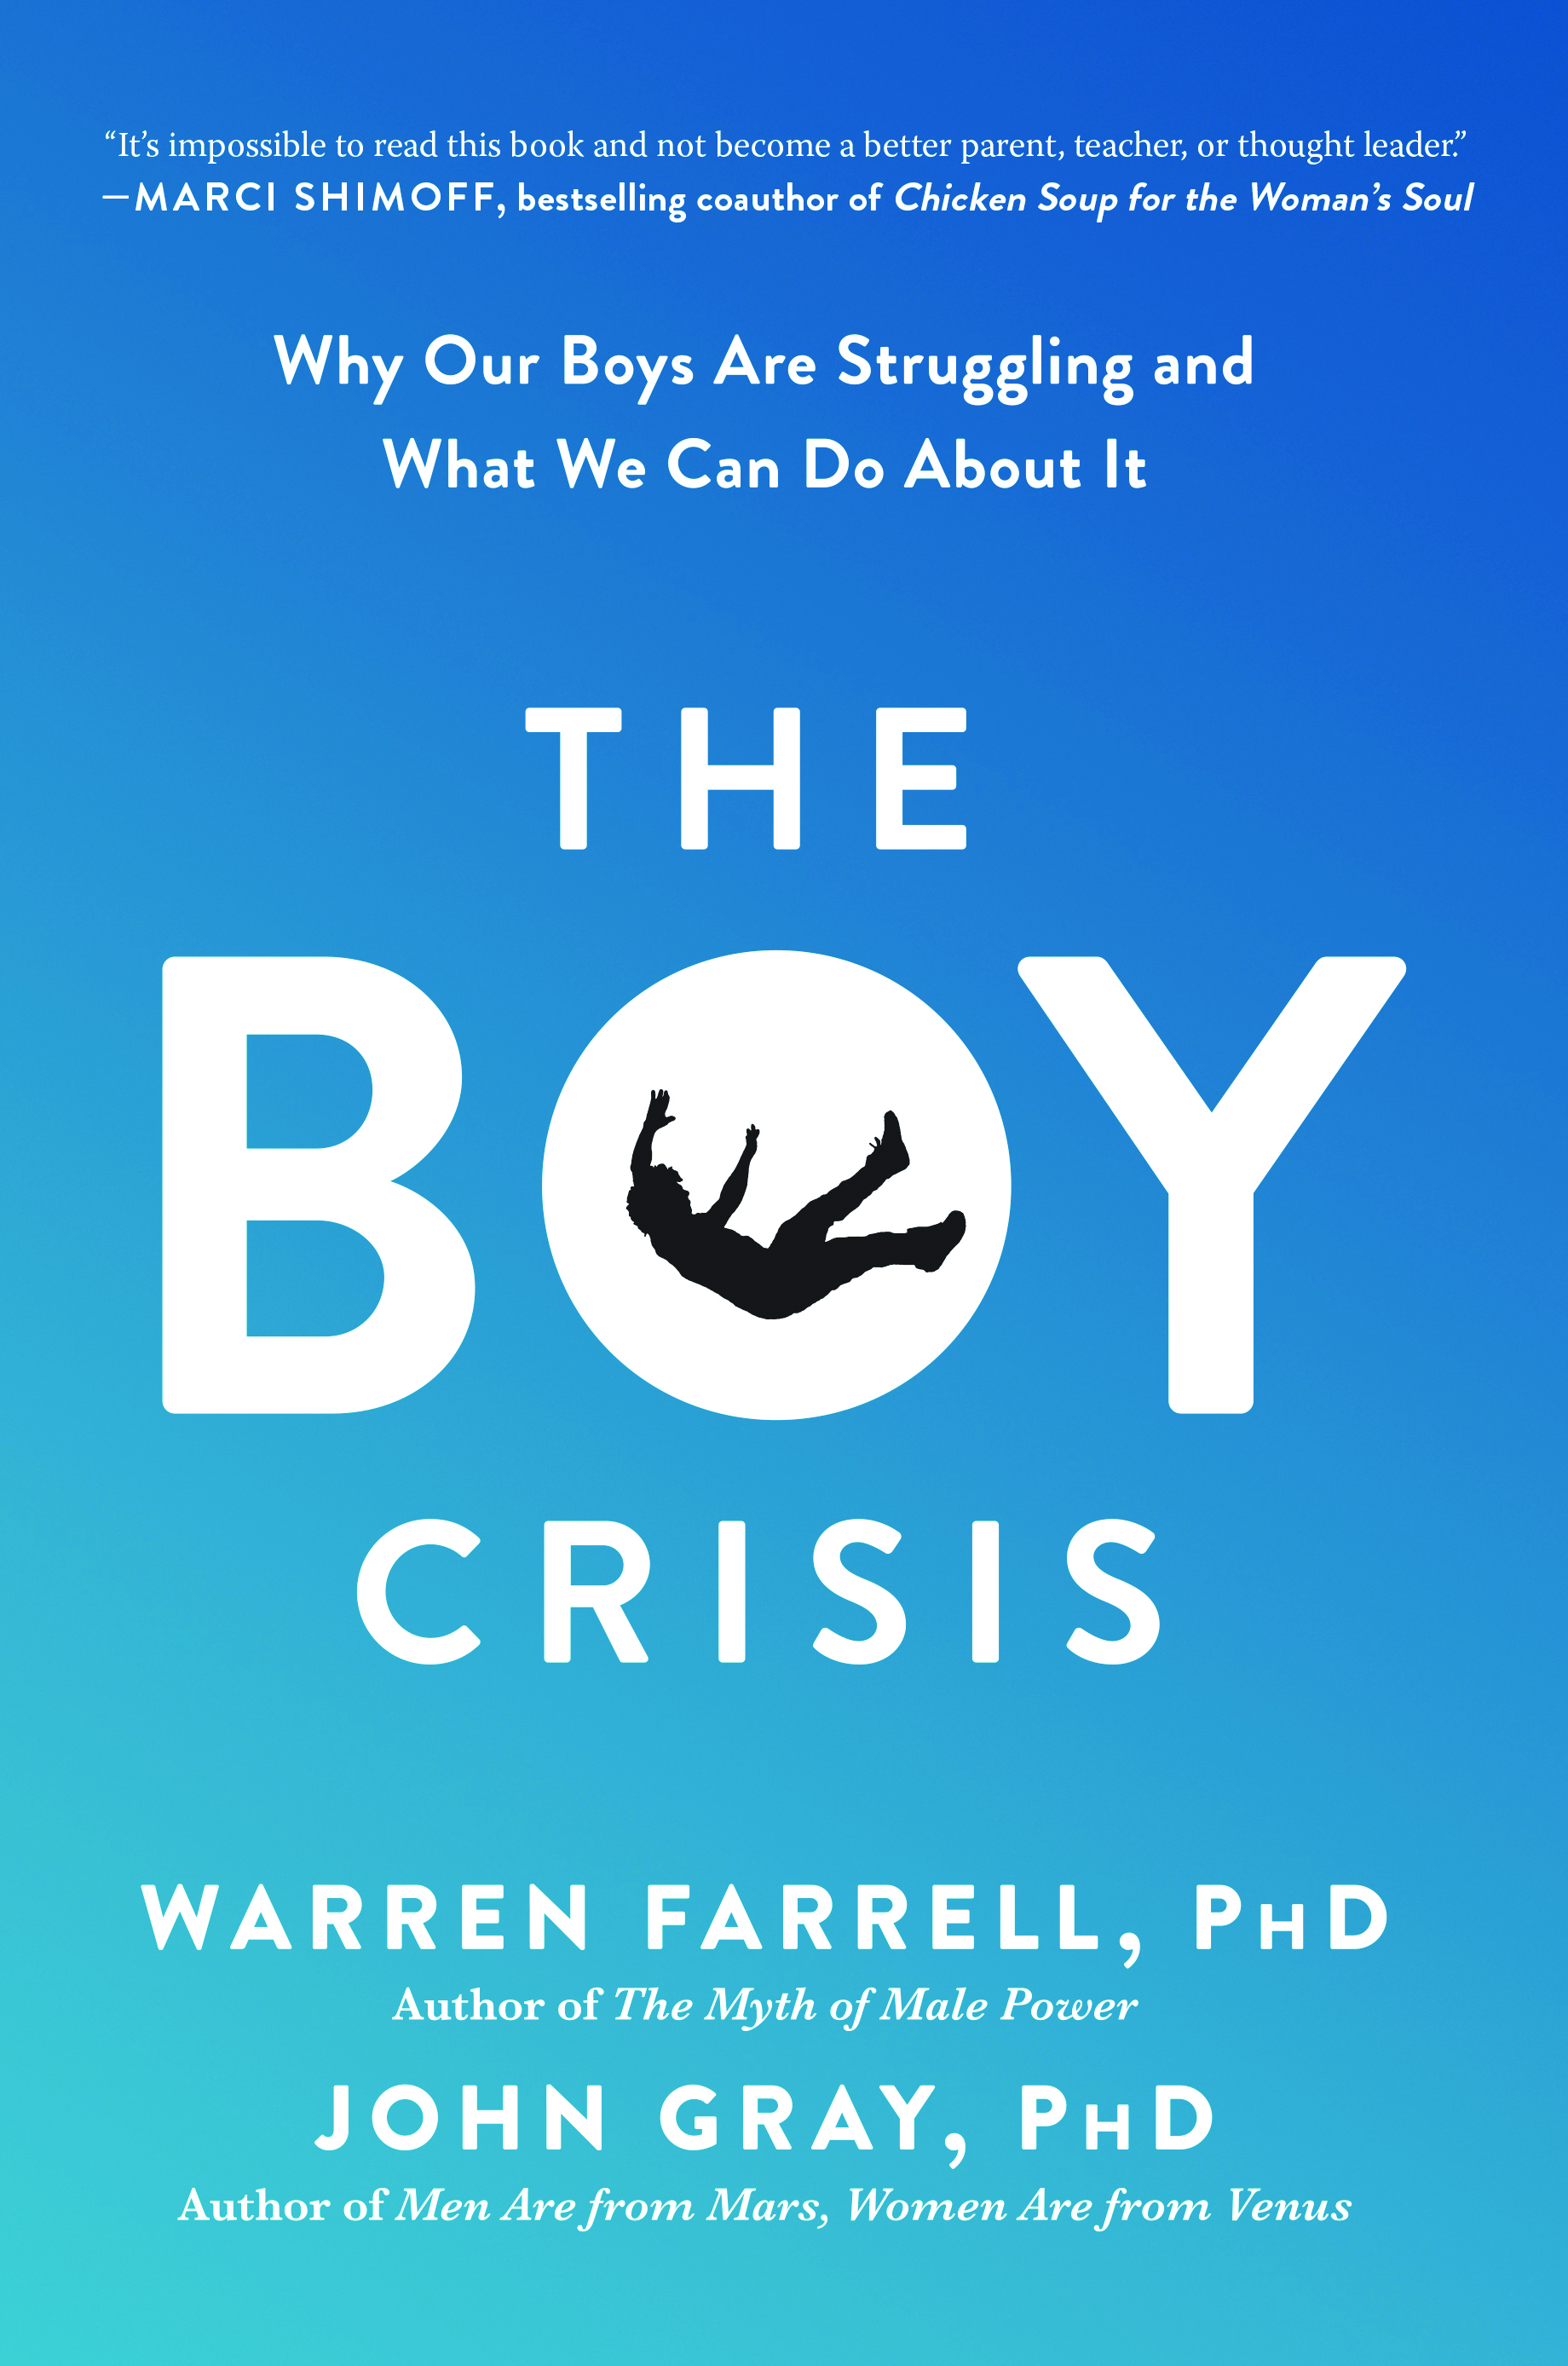 The Boy Crisis: Why Our Boys Are Struggling and What We Can Do About It by Dr. Warren Farrell and Dr. John Gray